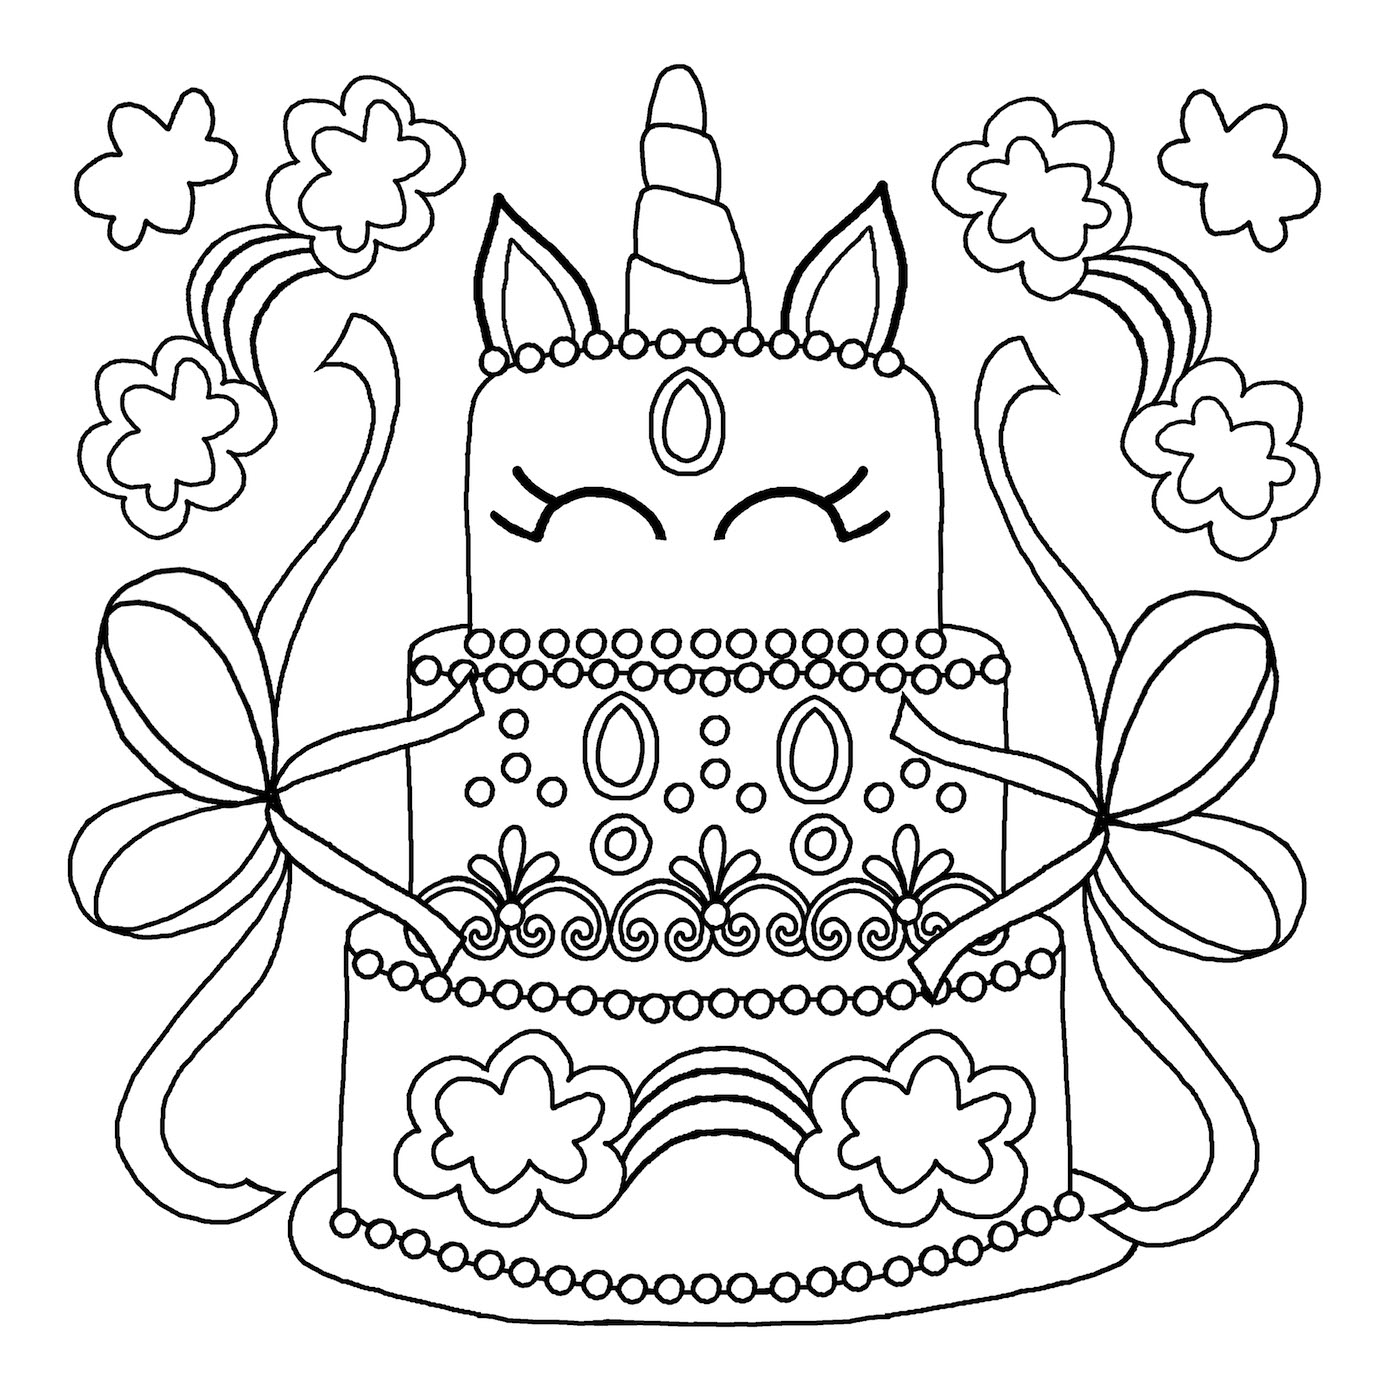 coloring pages for free printables unicorn